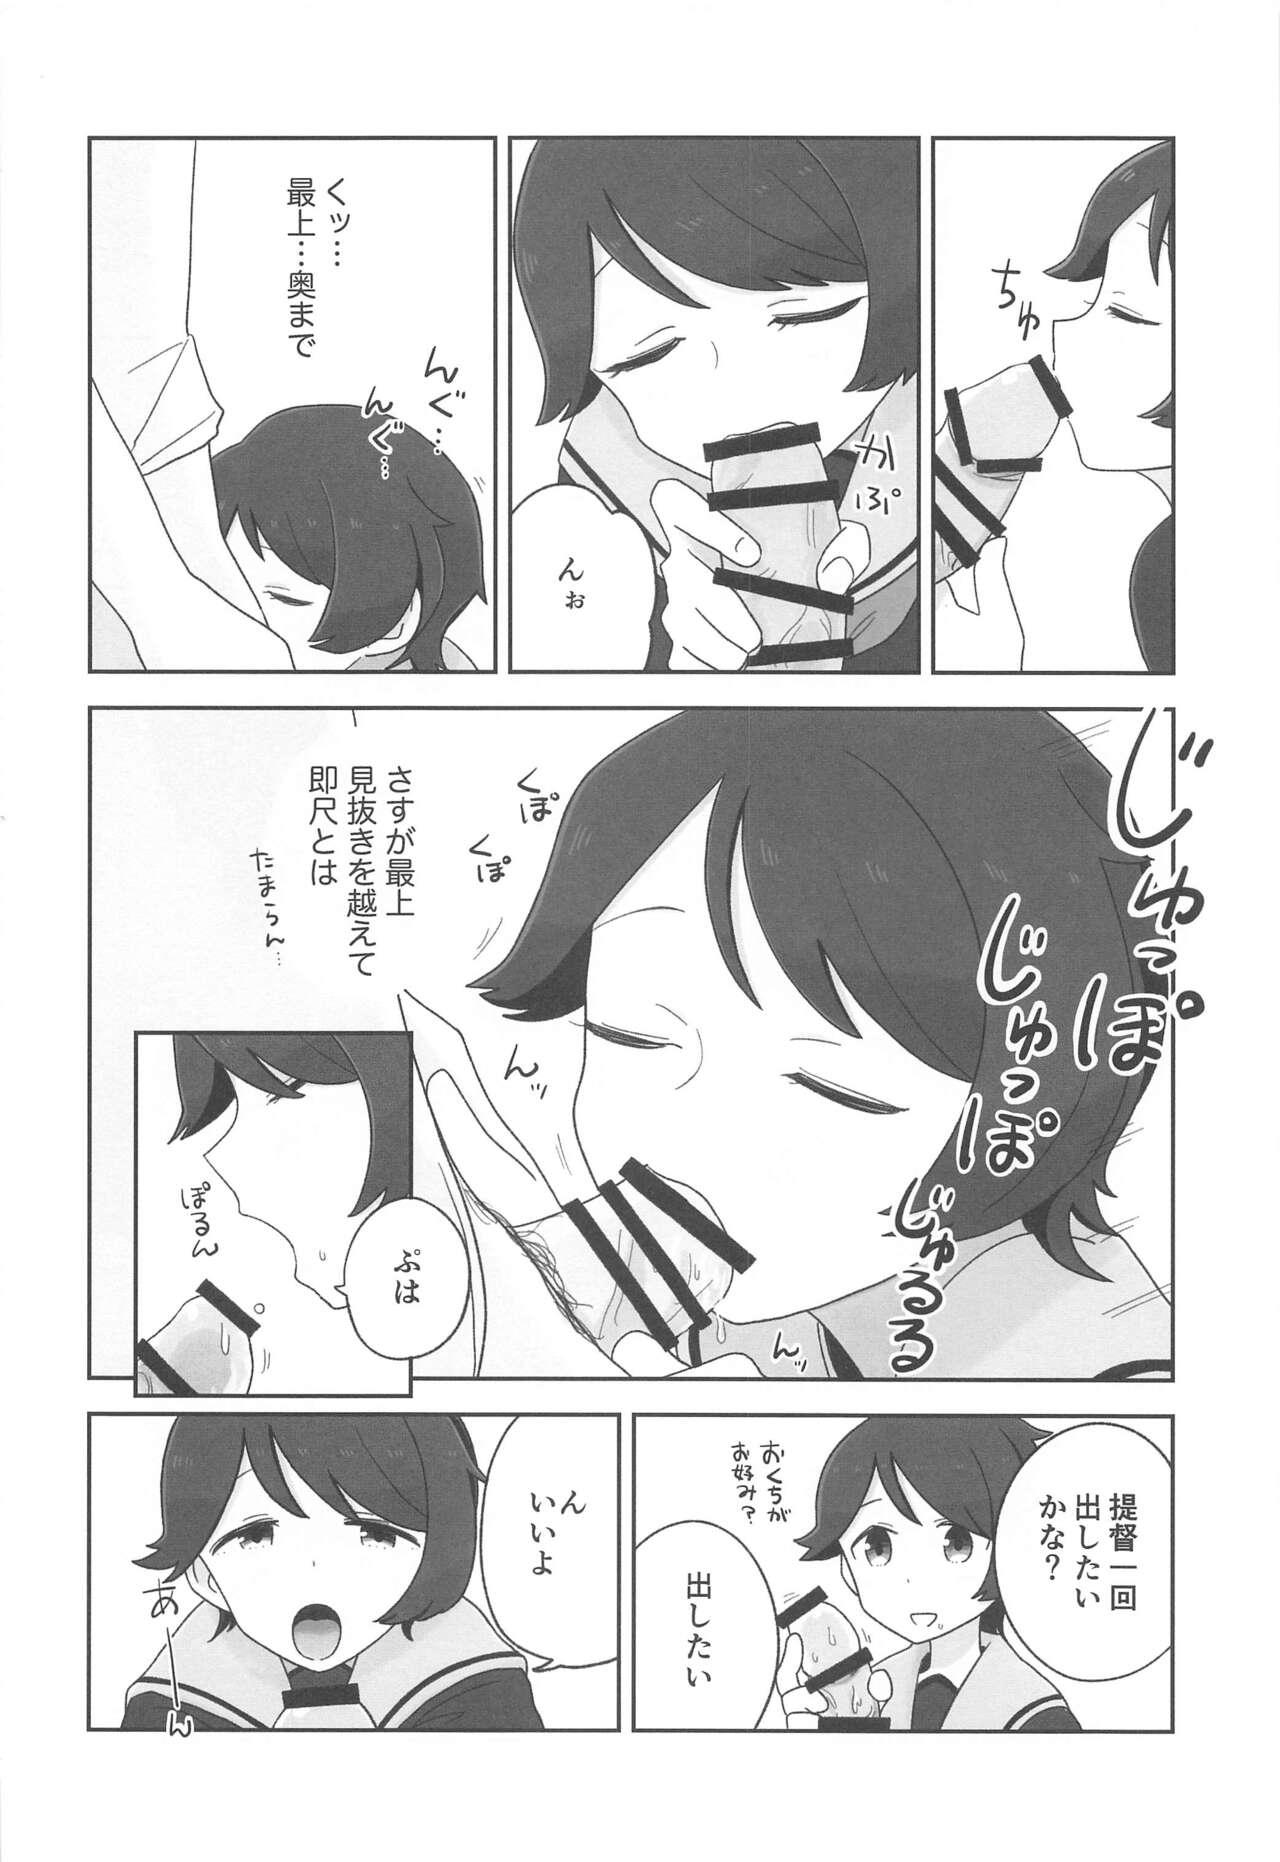 Emo Mogamix - Make love with Mogami. - Kantai collection Online - Page 3